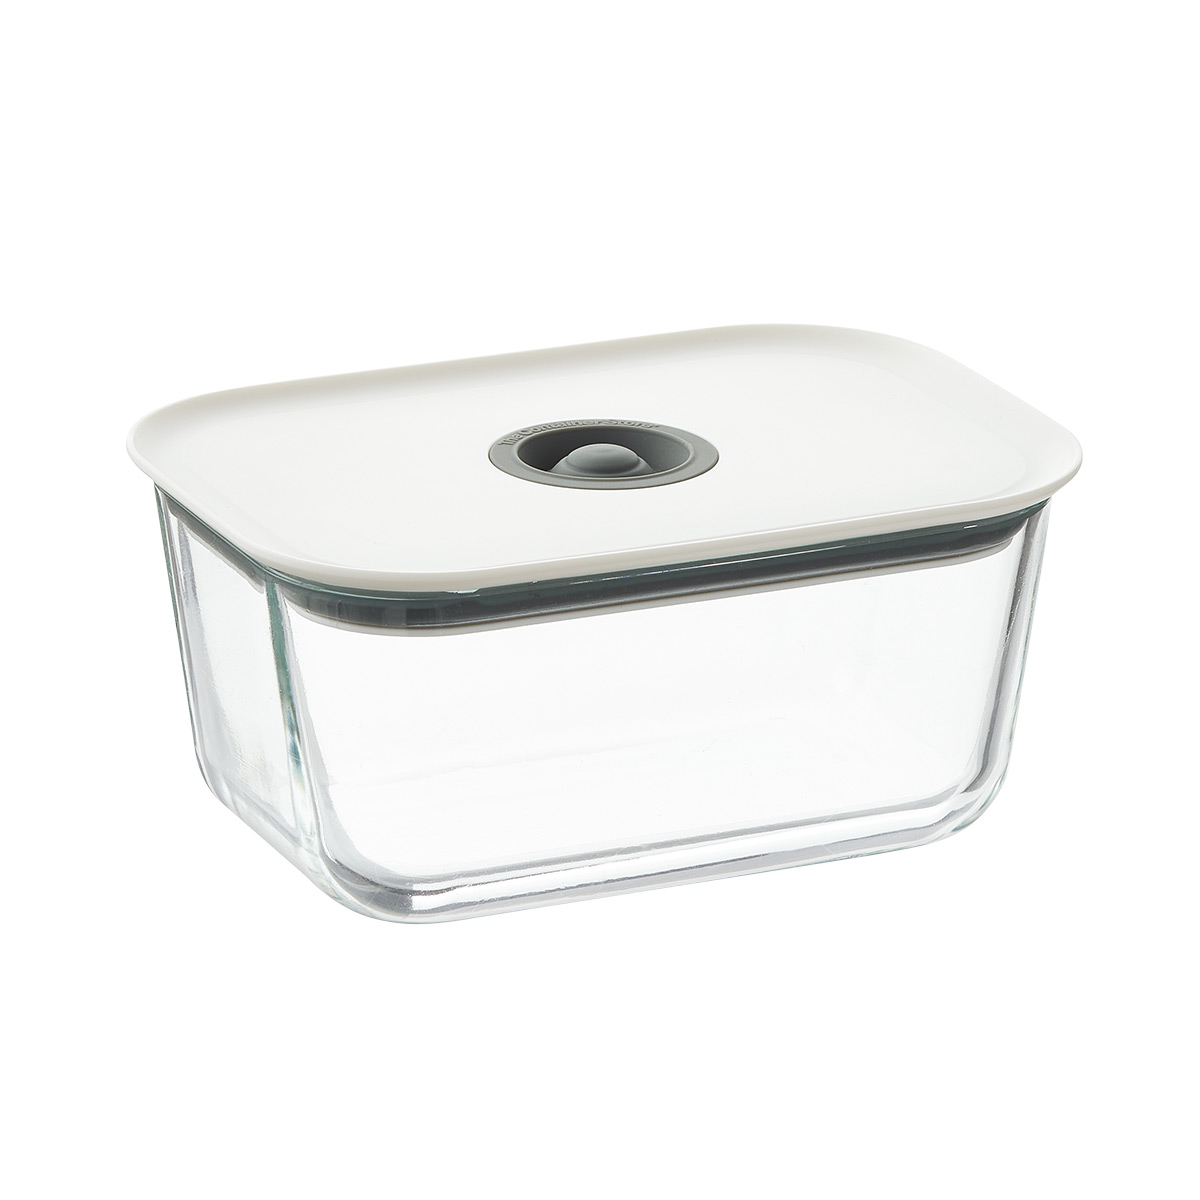 https://www.containerstore.com/catalogimages/449876/10089659_Vent_N_Fresh_Borosilicate_F.jpg